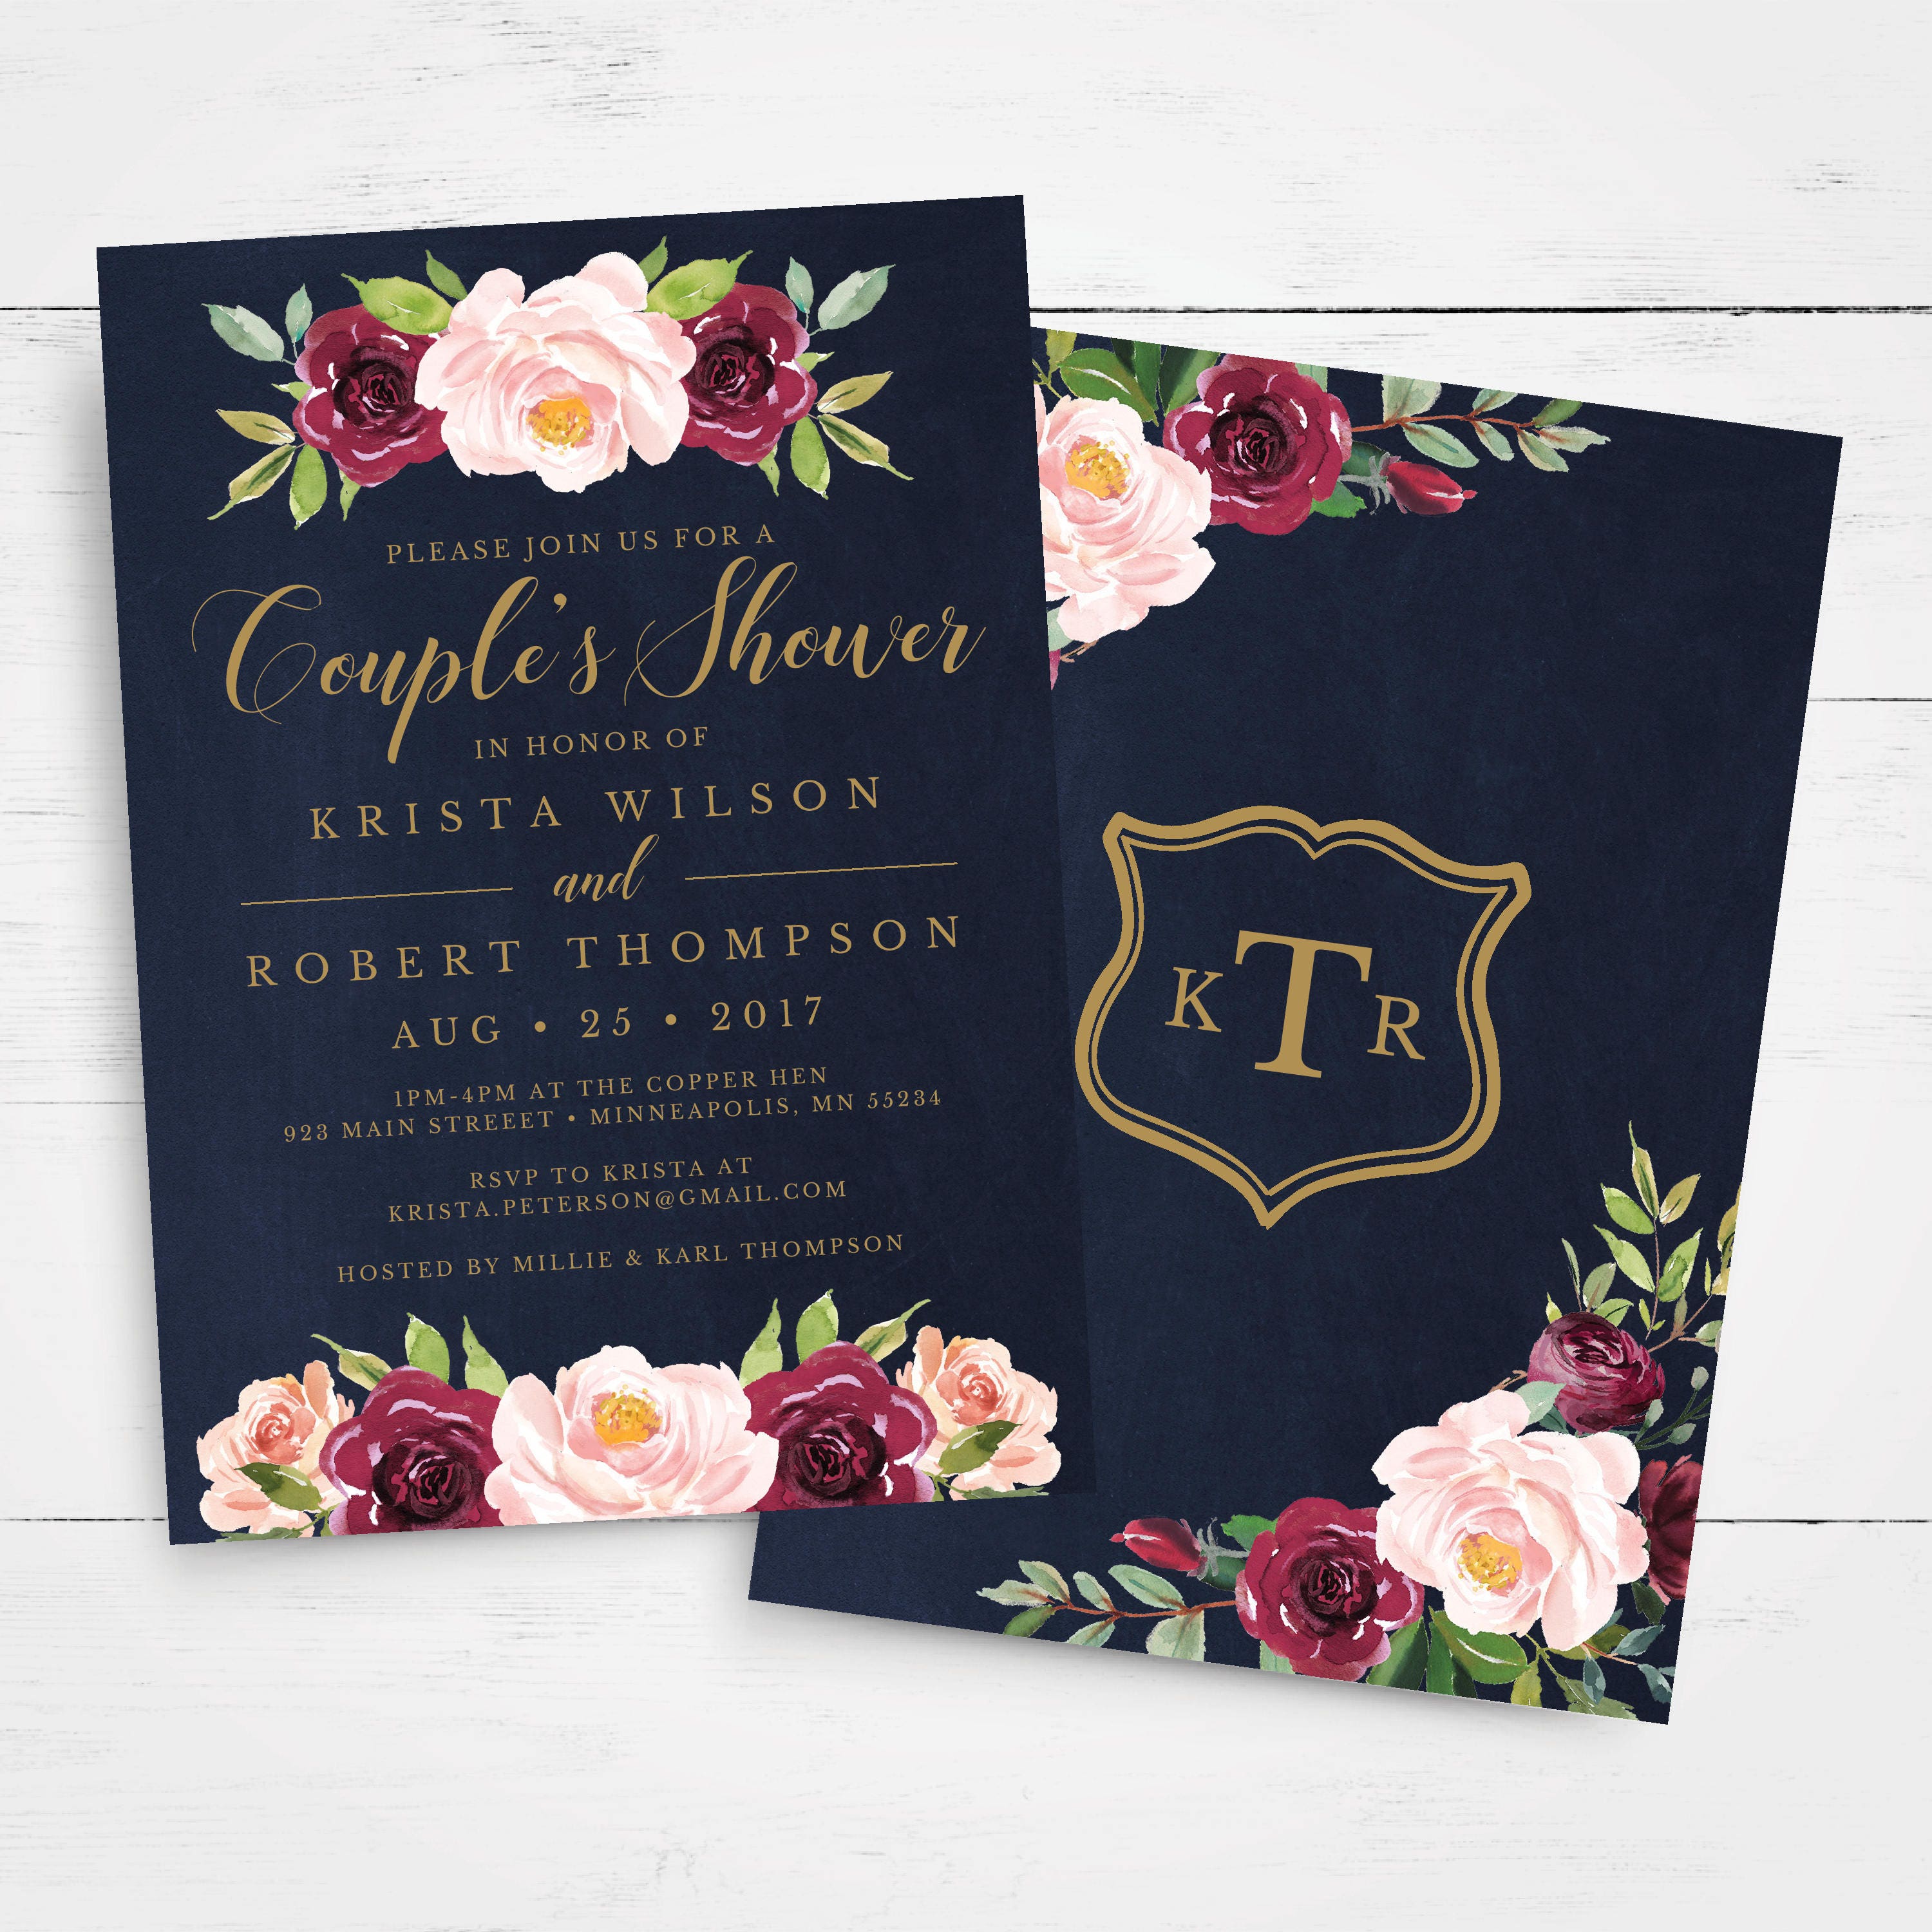 couples shower invitations Couples wedding shower invitations templates ...